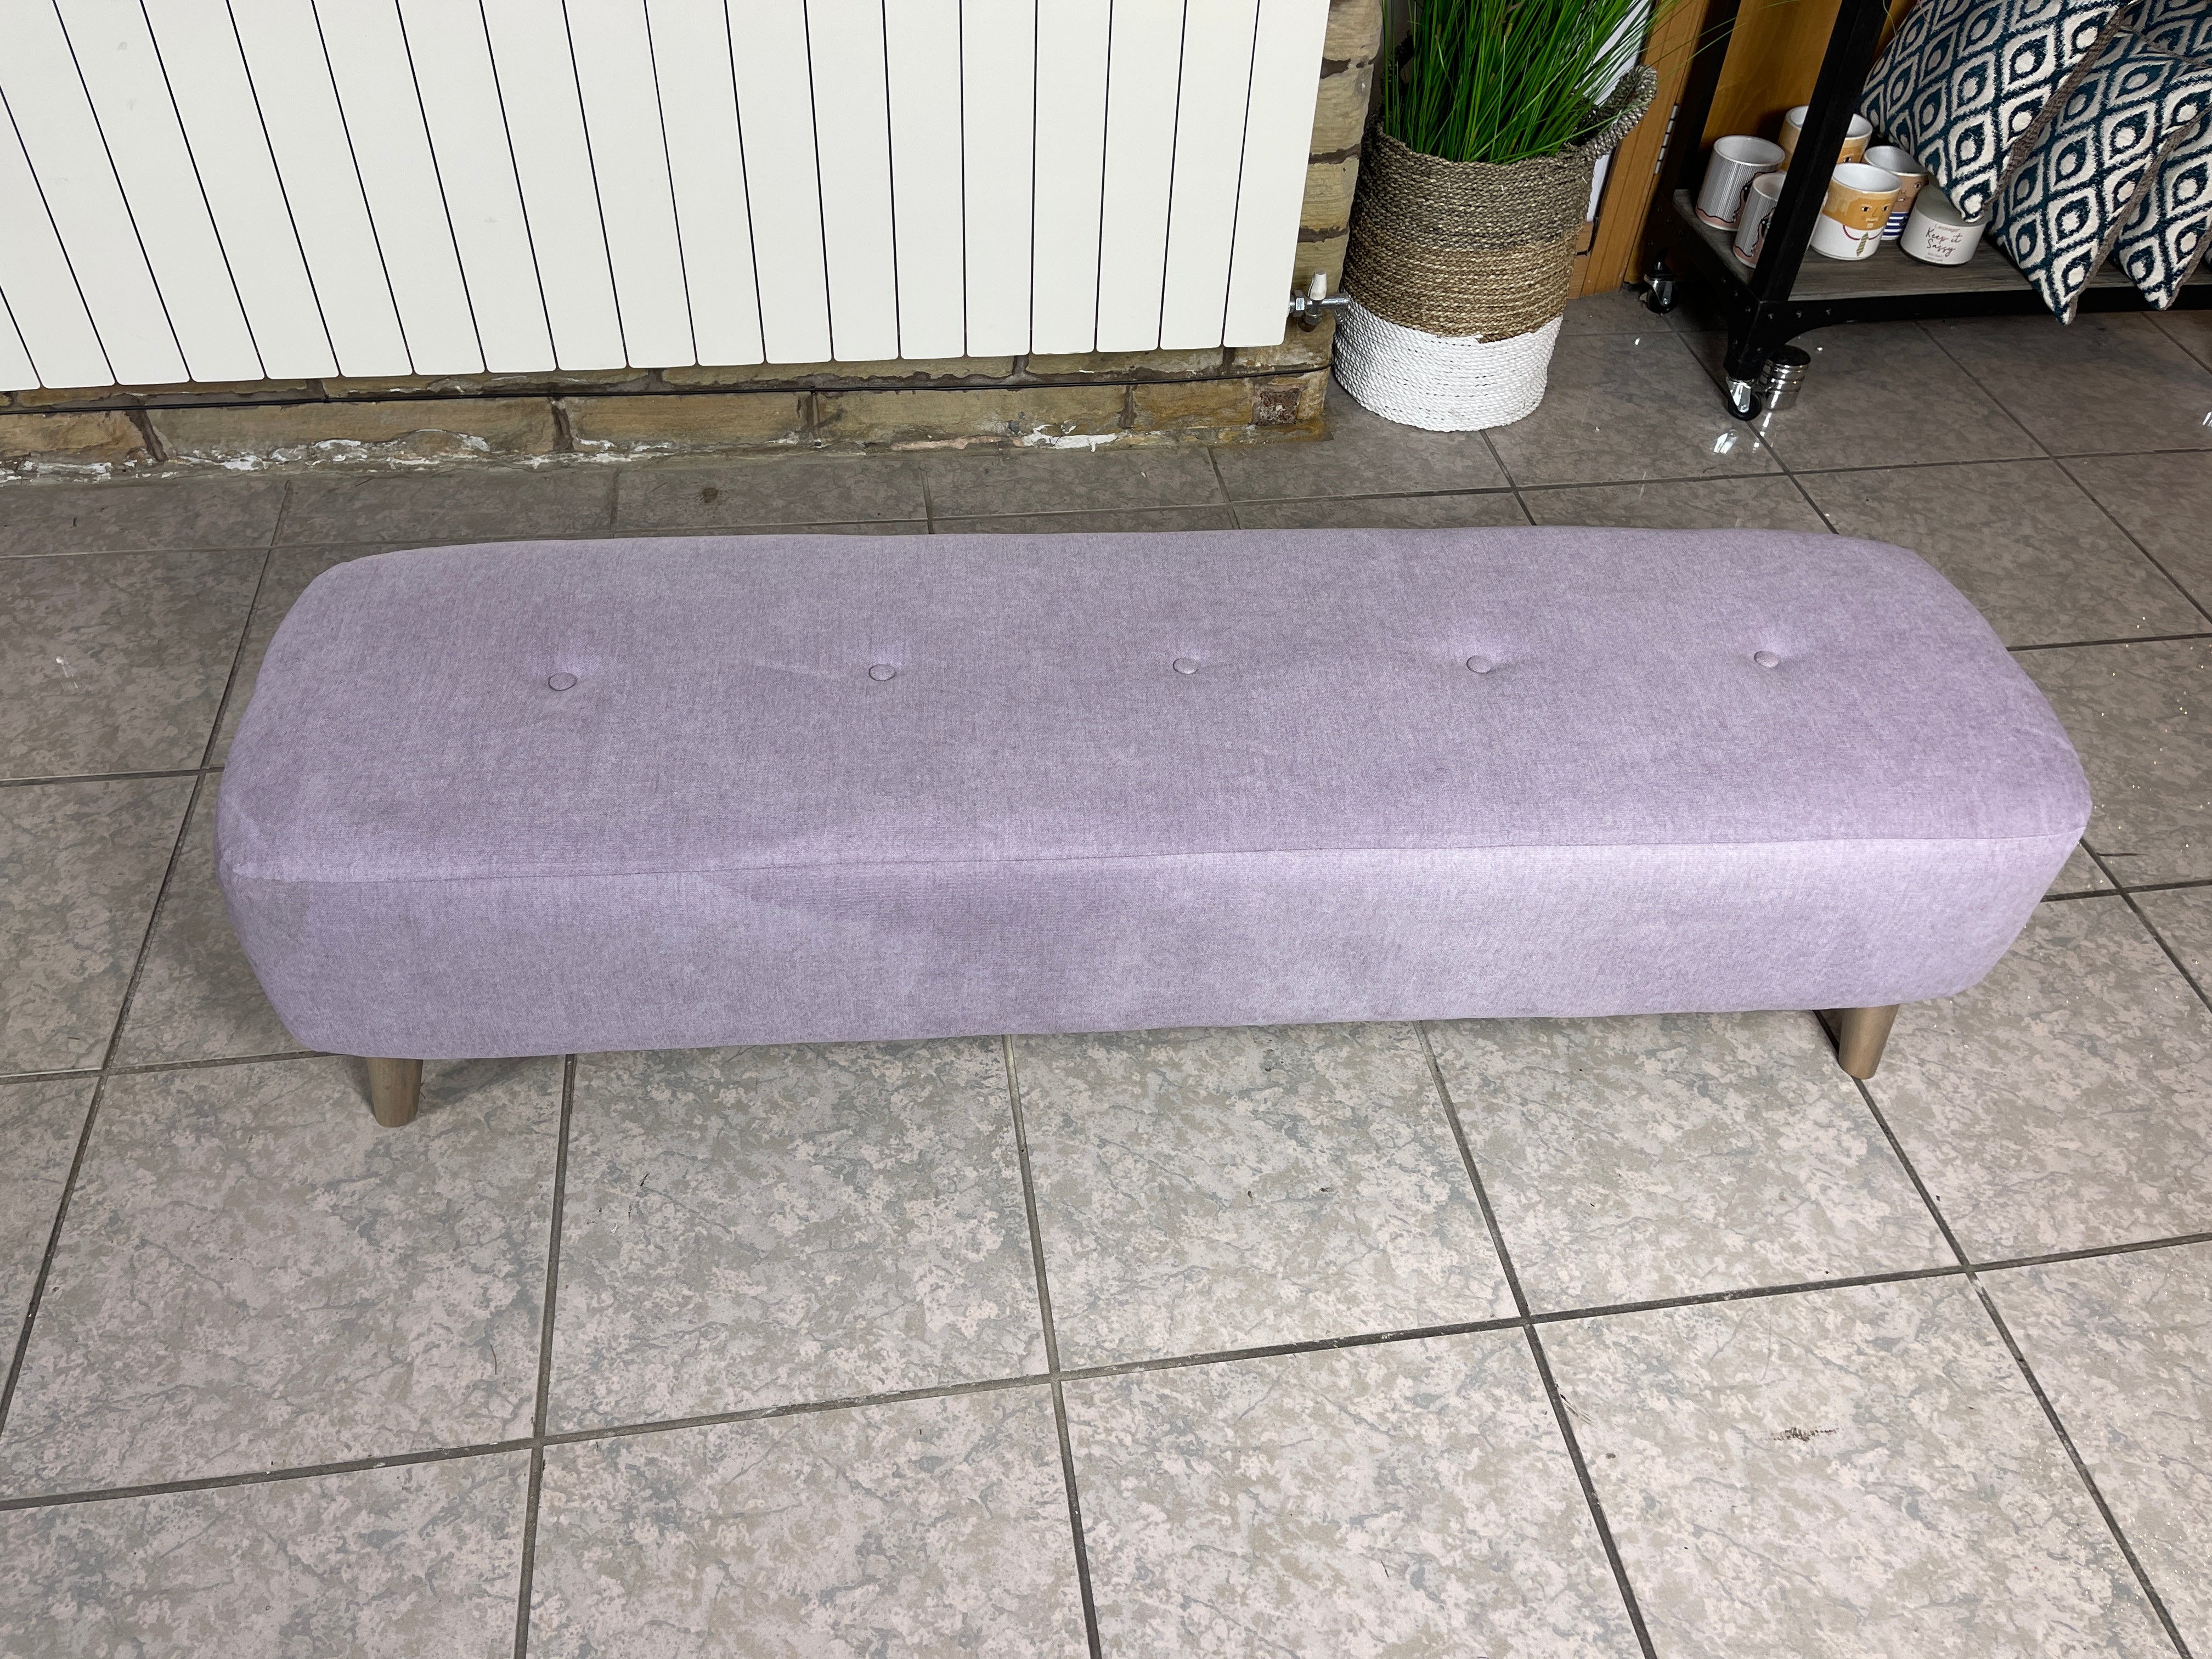 WHITE LABEL LISBON long bench footstool in lavender brushed cotton fabric